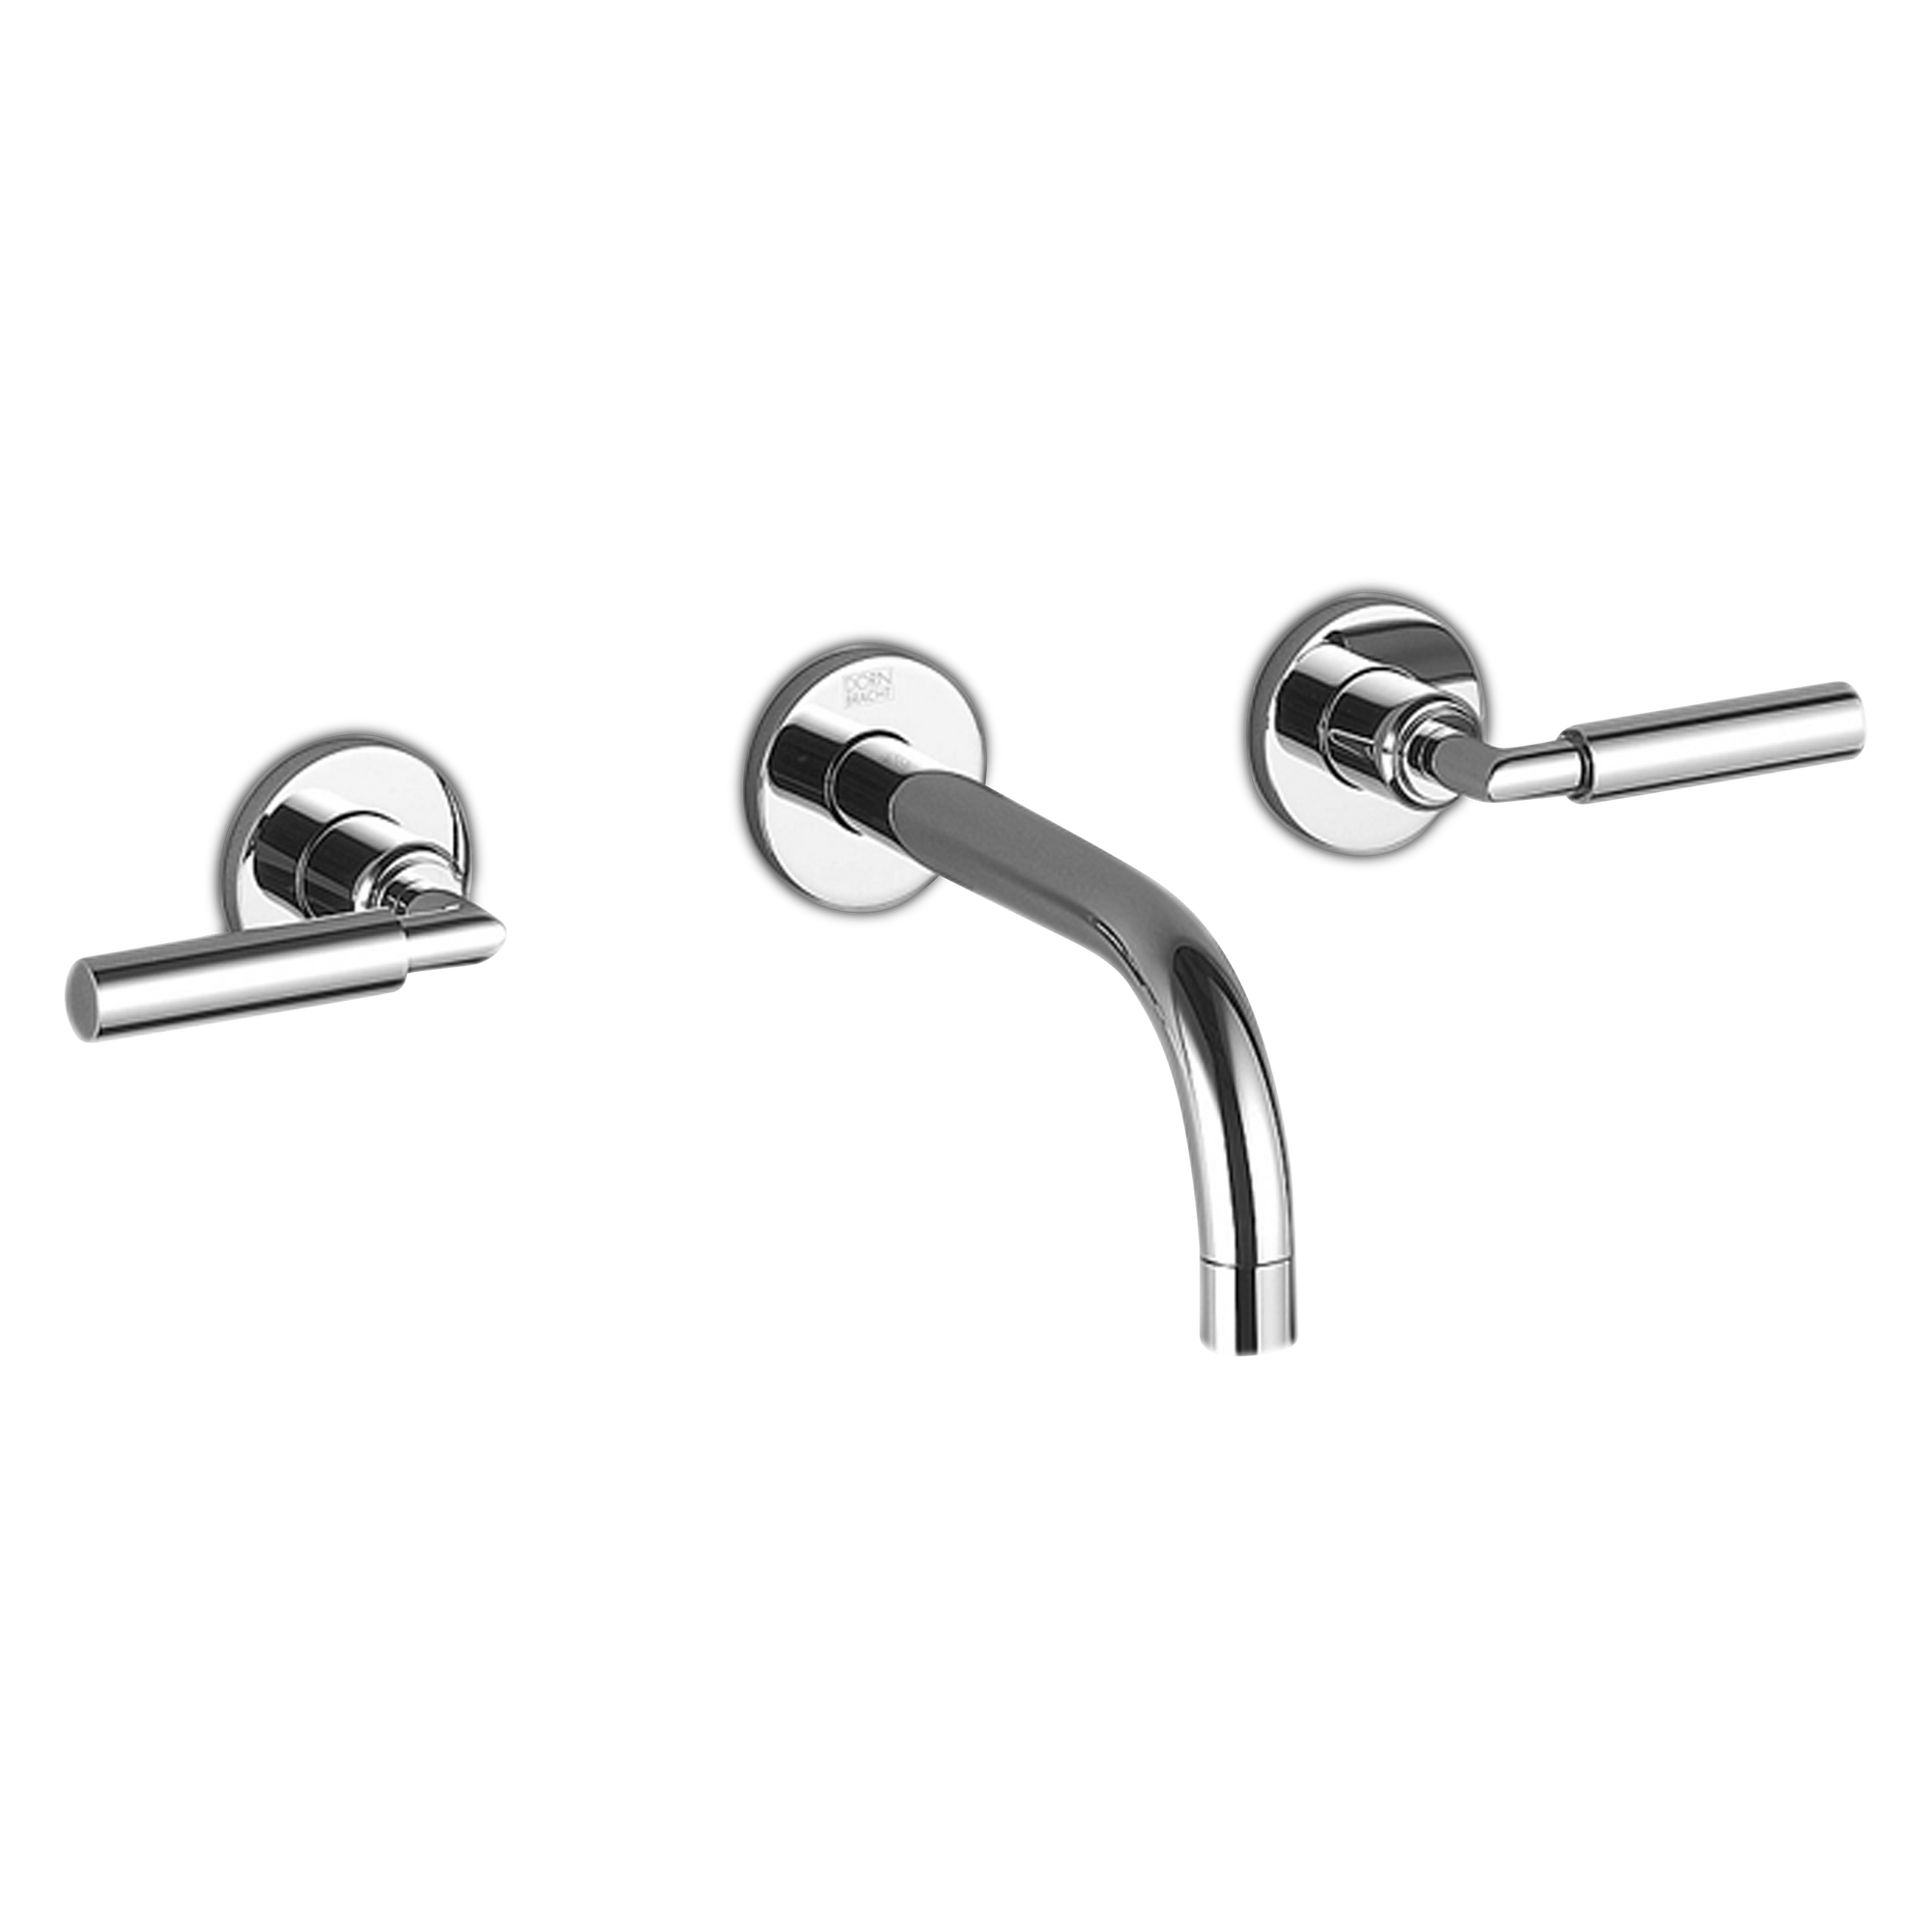 Wall-mount two-handle basin faucet with cross knob handles.